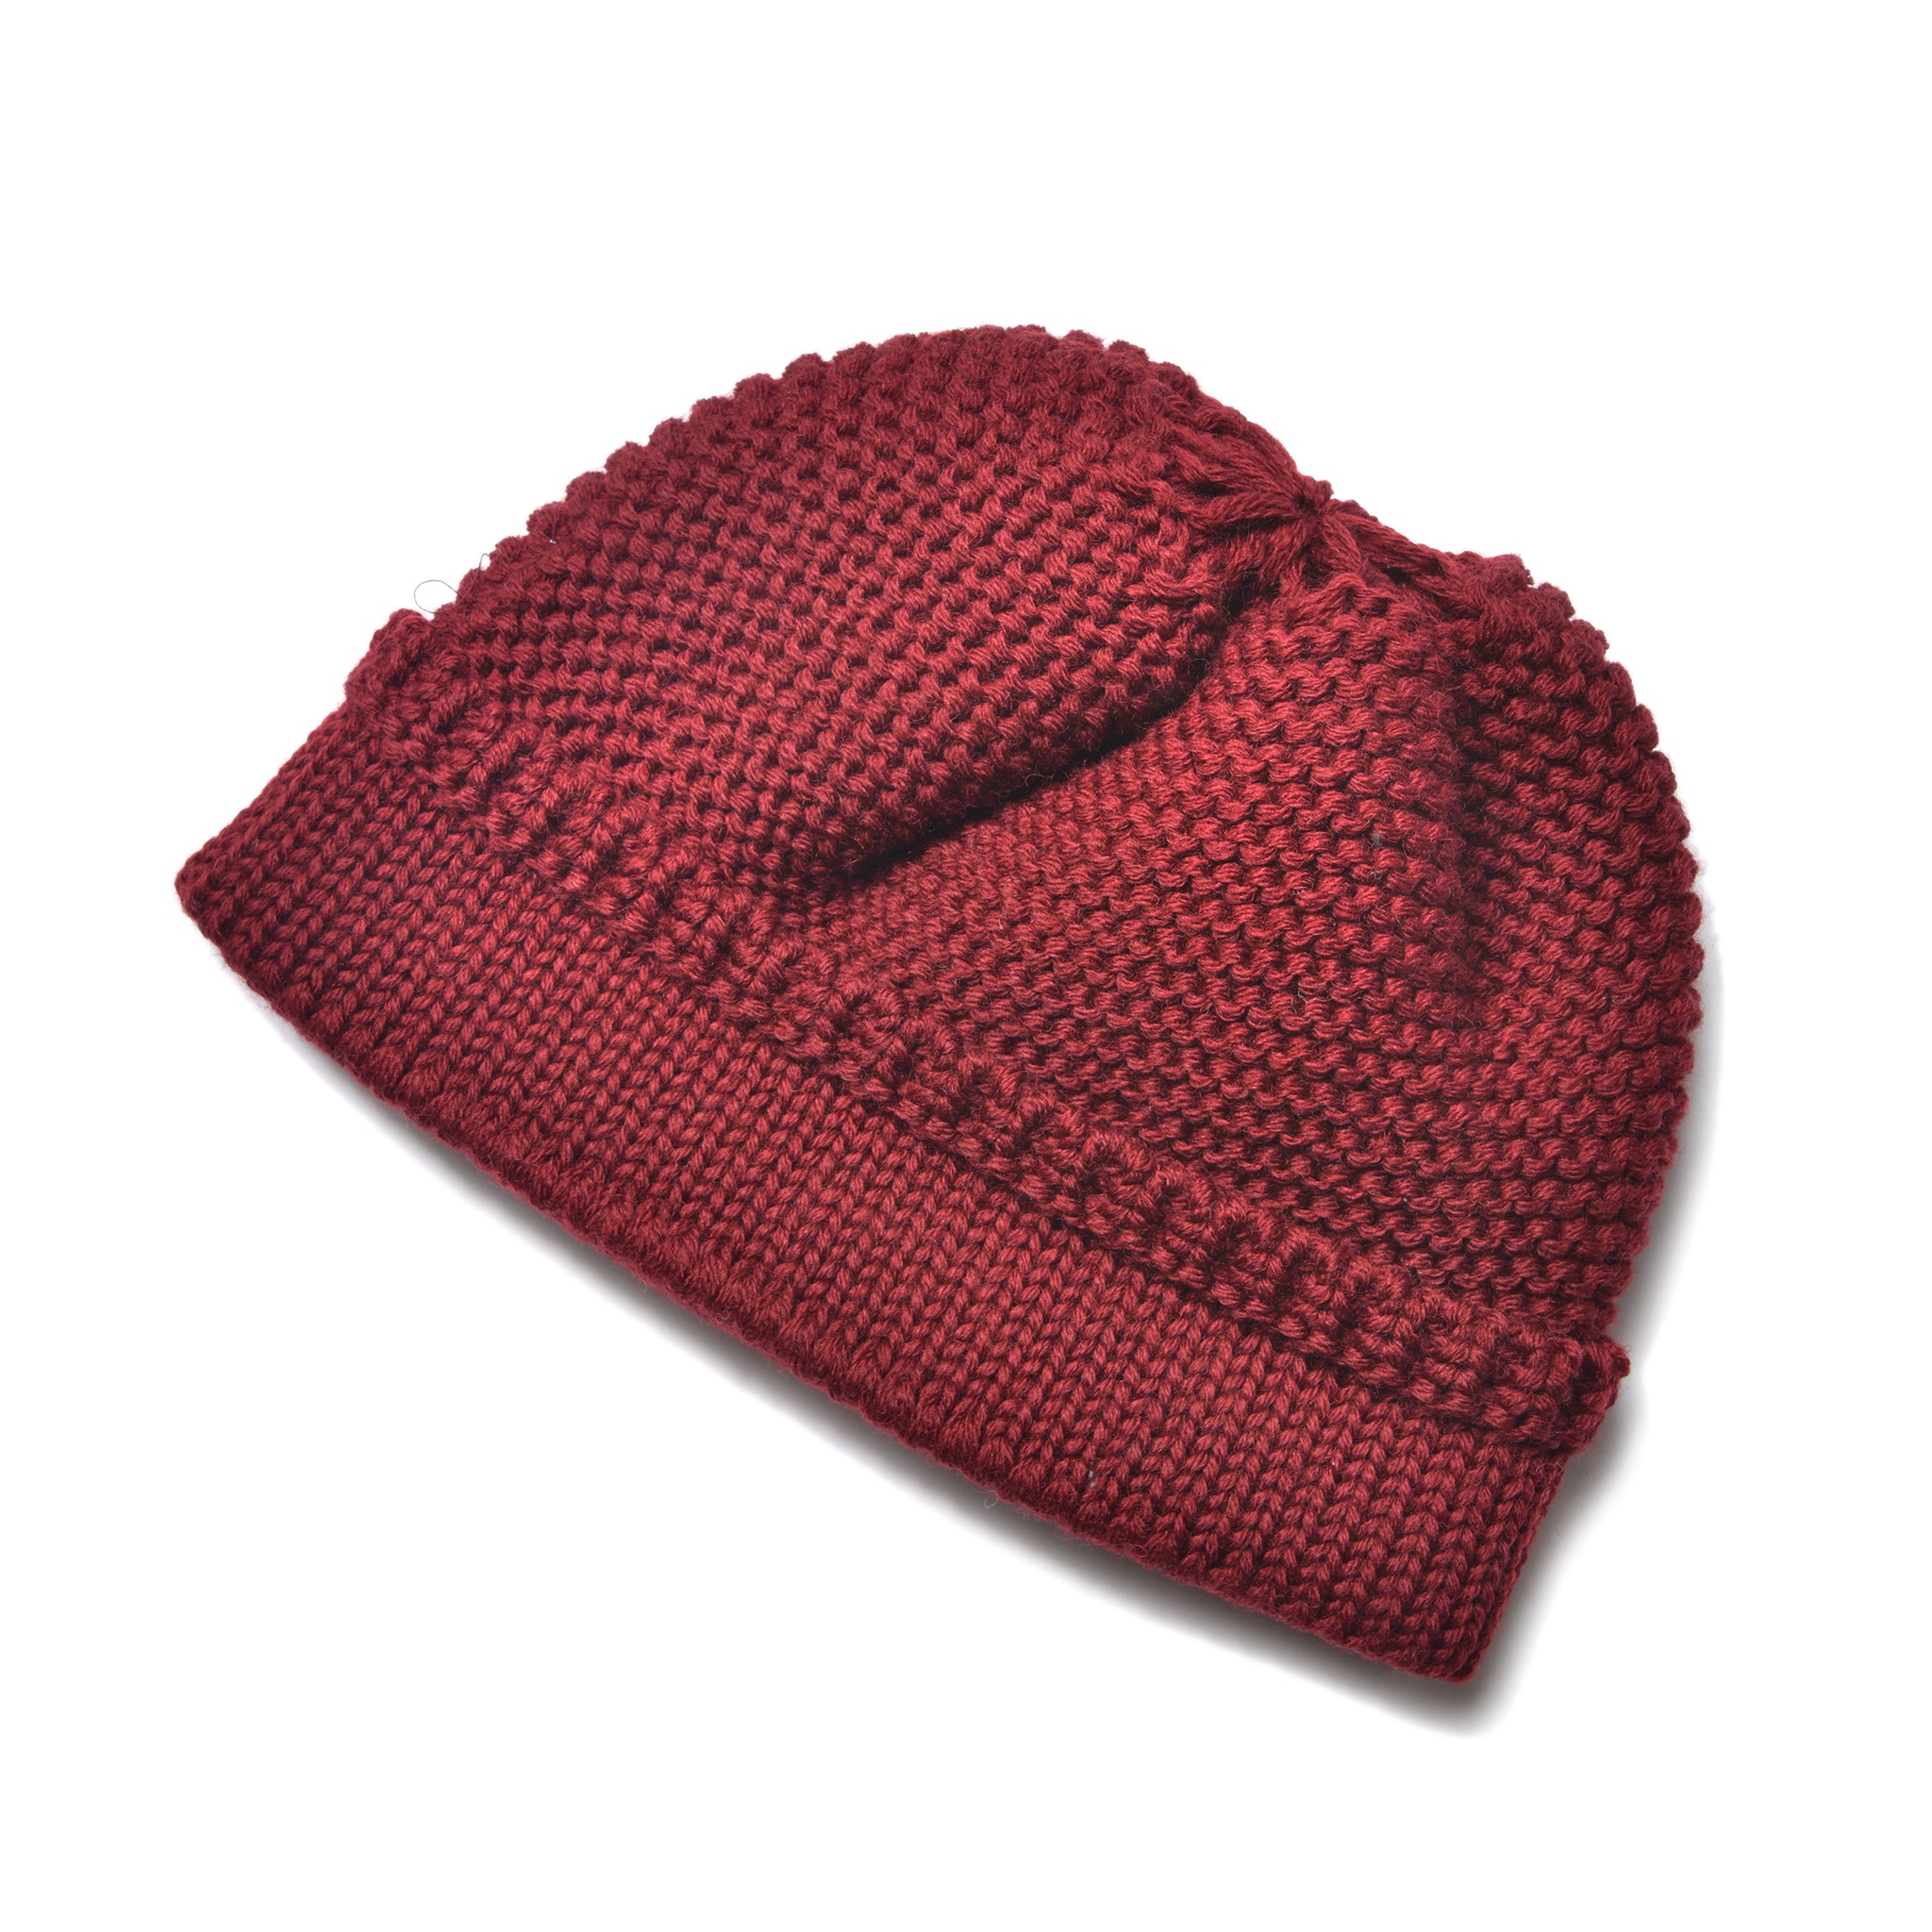 FISHERMAN'S KNIT CAP – The Real McCoy's